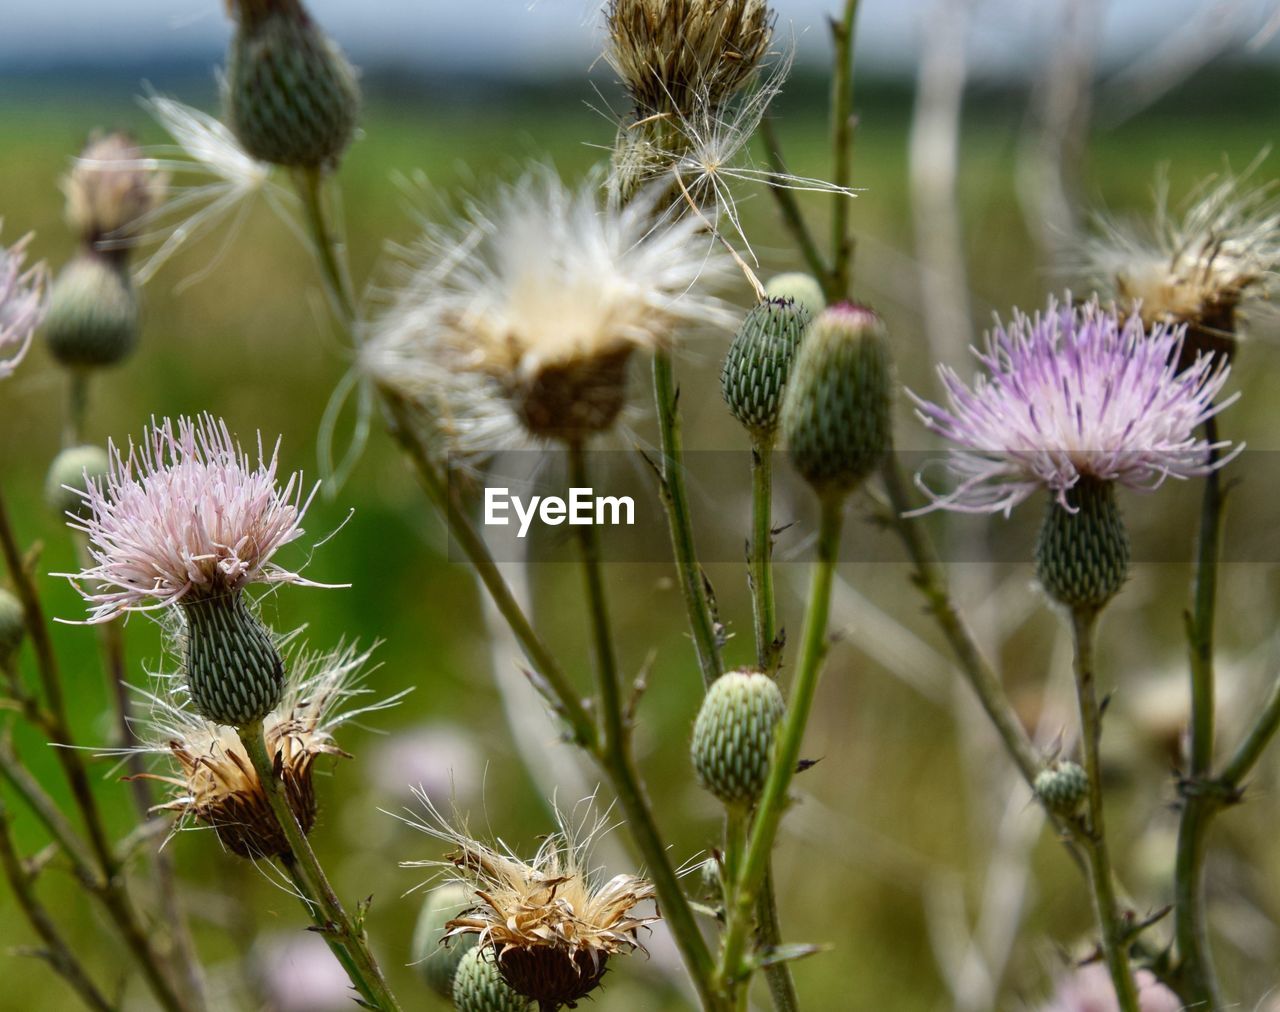 flower, plant, flowering plant, thistle, beauty in nature, nature, freshness, close-up, growth, focus on foreground, no people, macro photography, fragility, wildflower, flower head, inflorescence, outdoors, prairie, day, environment, food, botany, land, food and drink, springtime, purple, thorn, blossom, selective focus